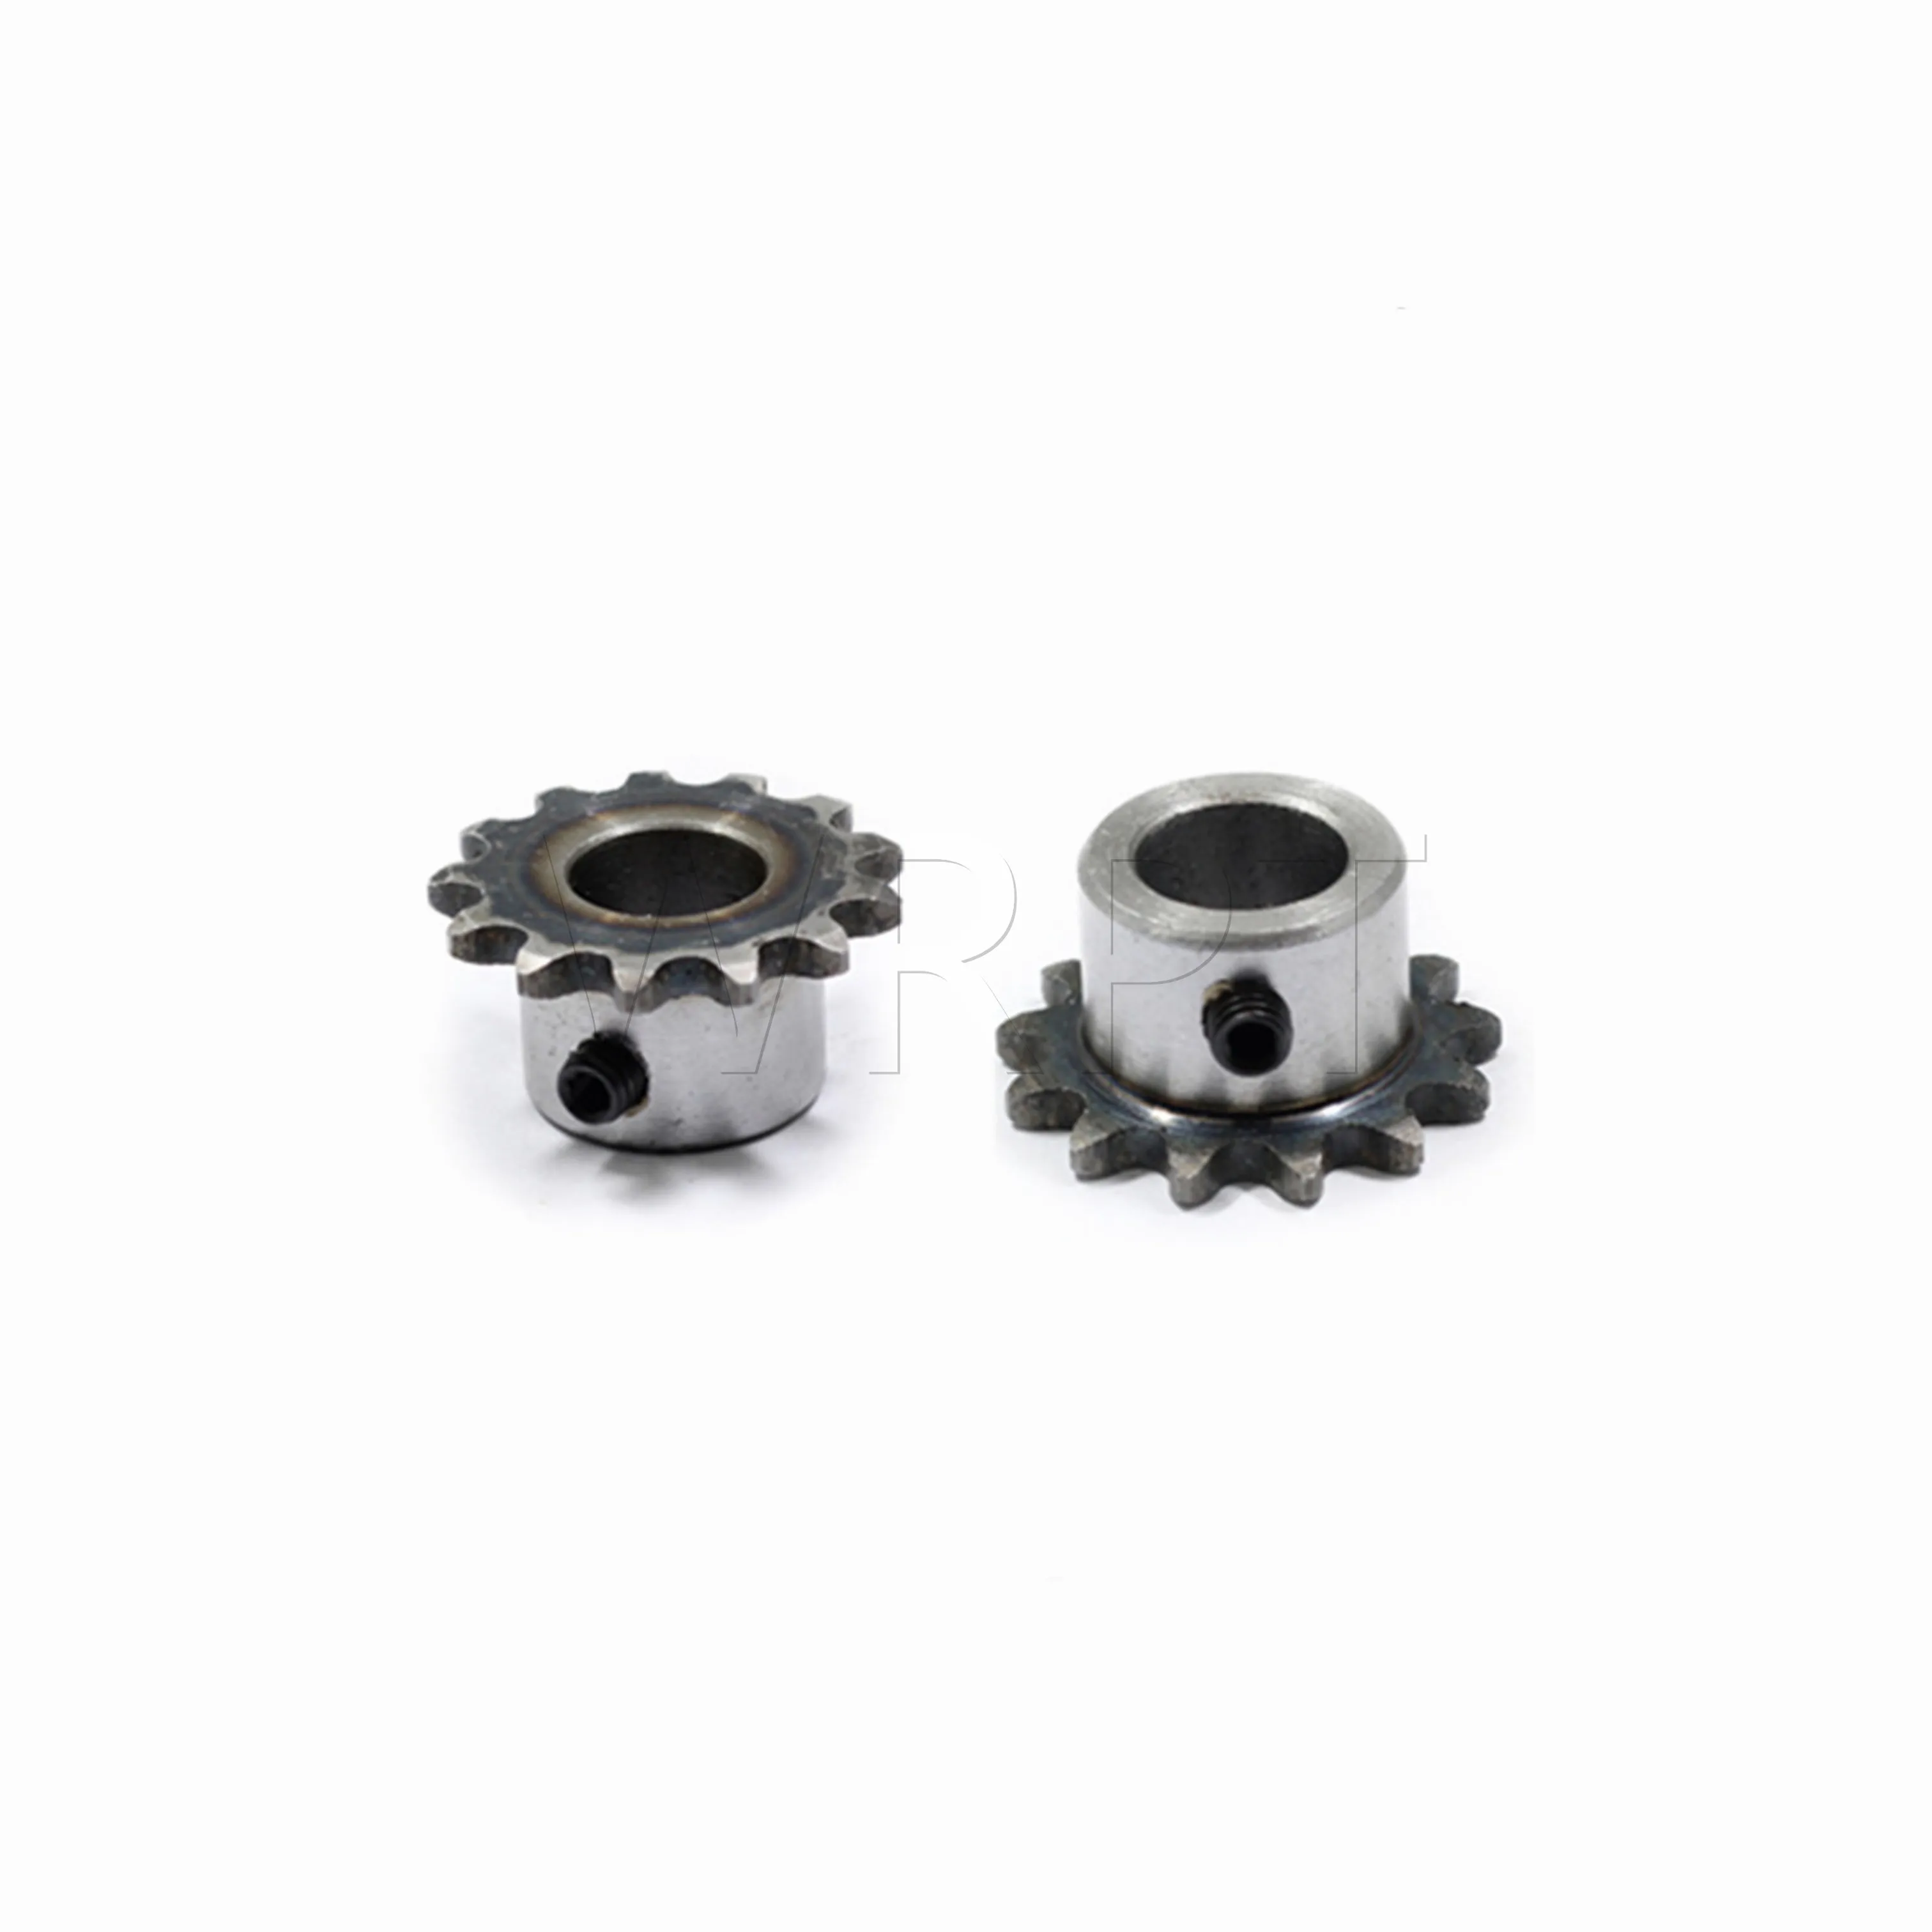 2 points(04C) Sprocket 19 to 24 Teeth Standard Hole M5 Screw Hole Fixed 45# Steel Quenching Pitch 6.35mm General Motor